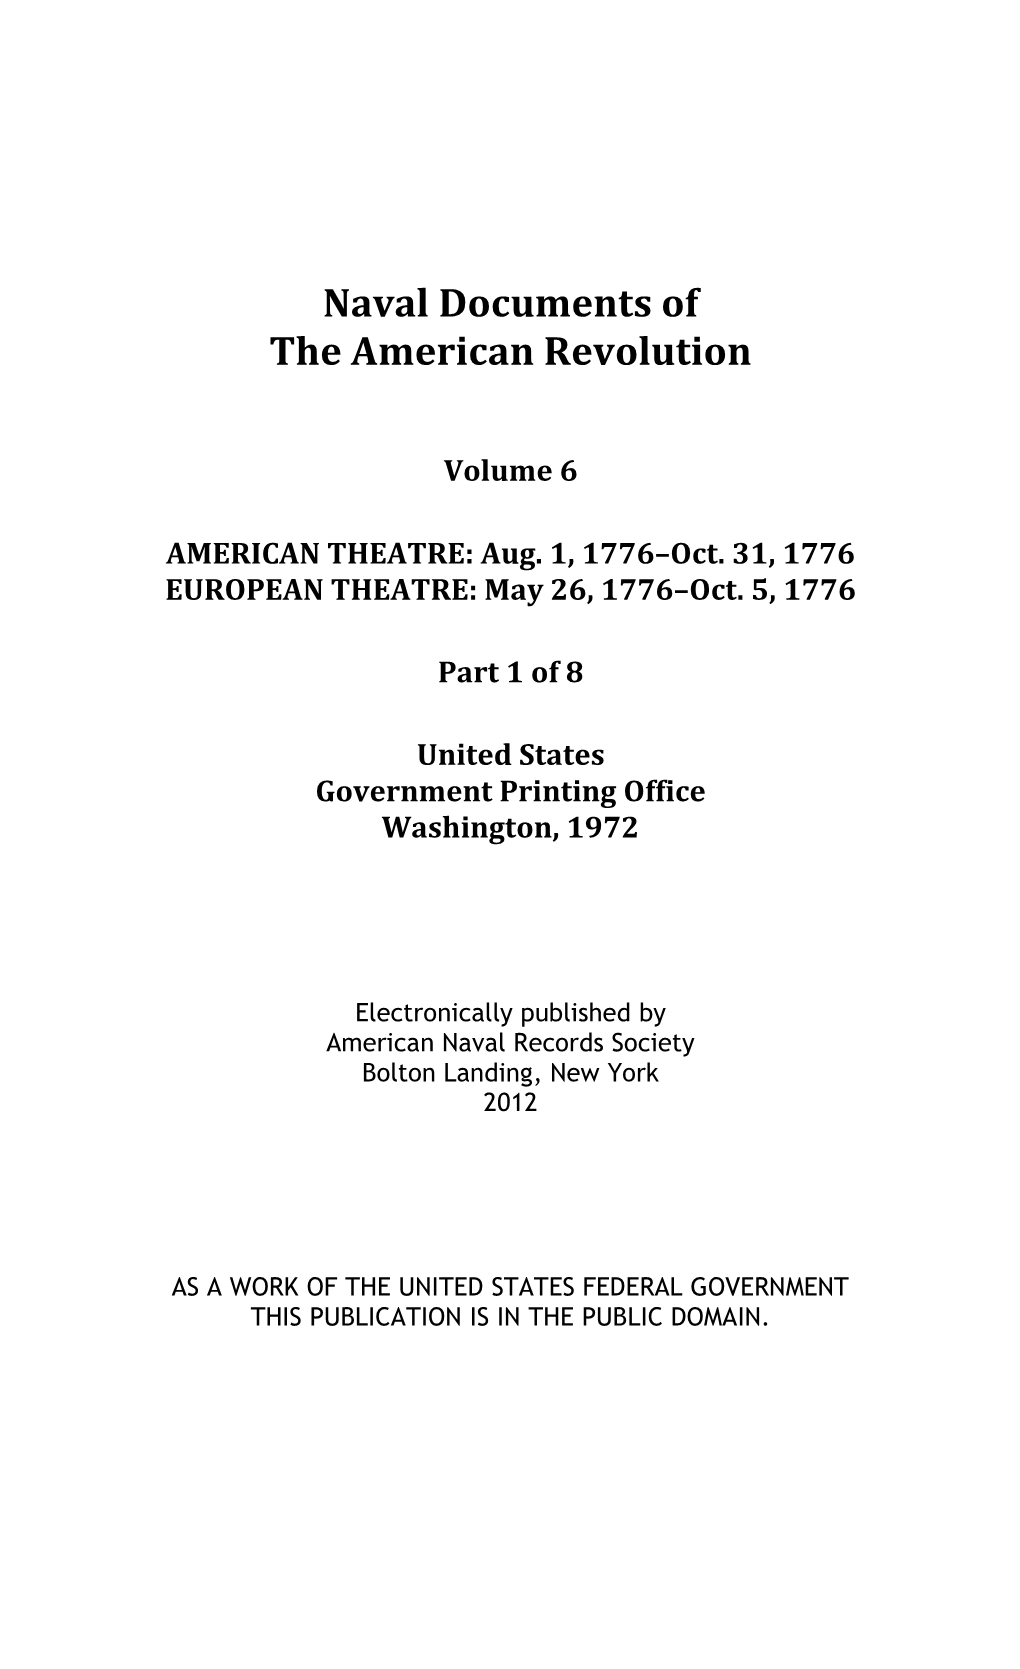 Naval Documents of the American Revolution